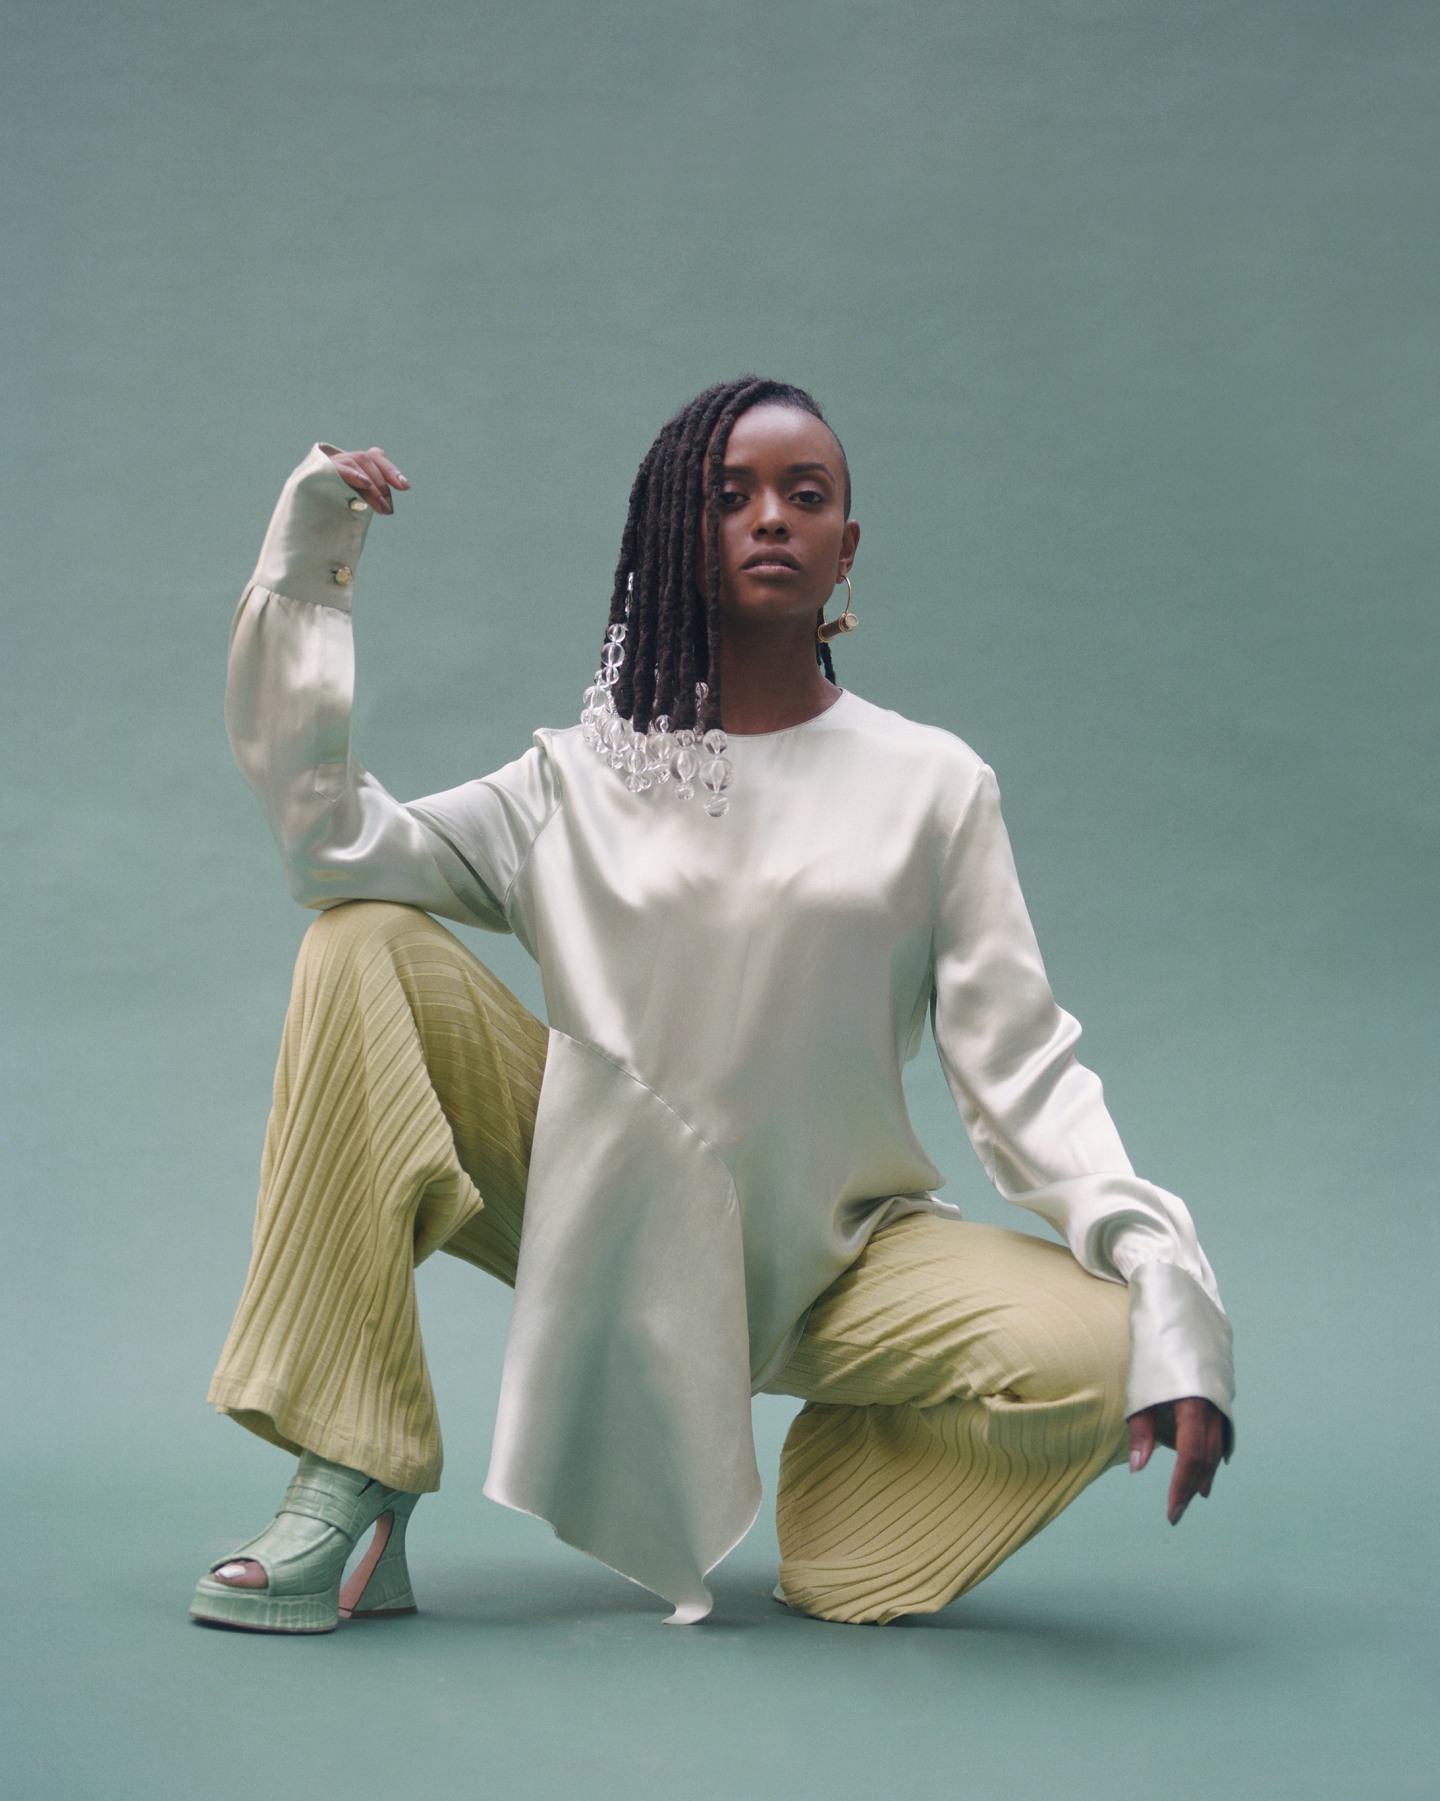 Kelela is ready for you now